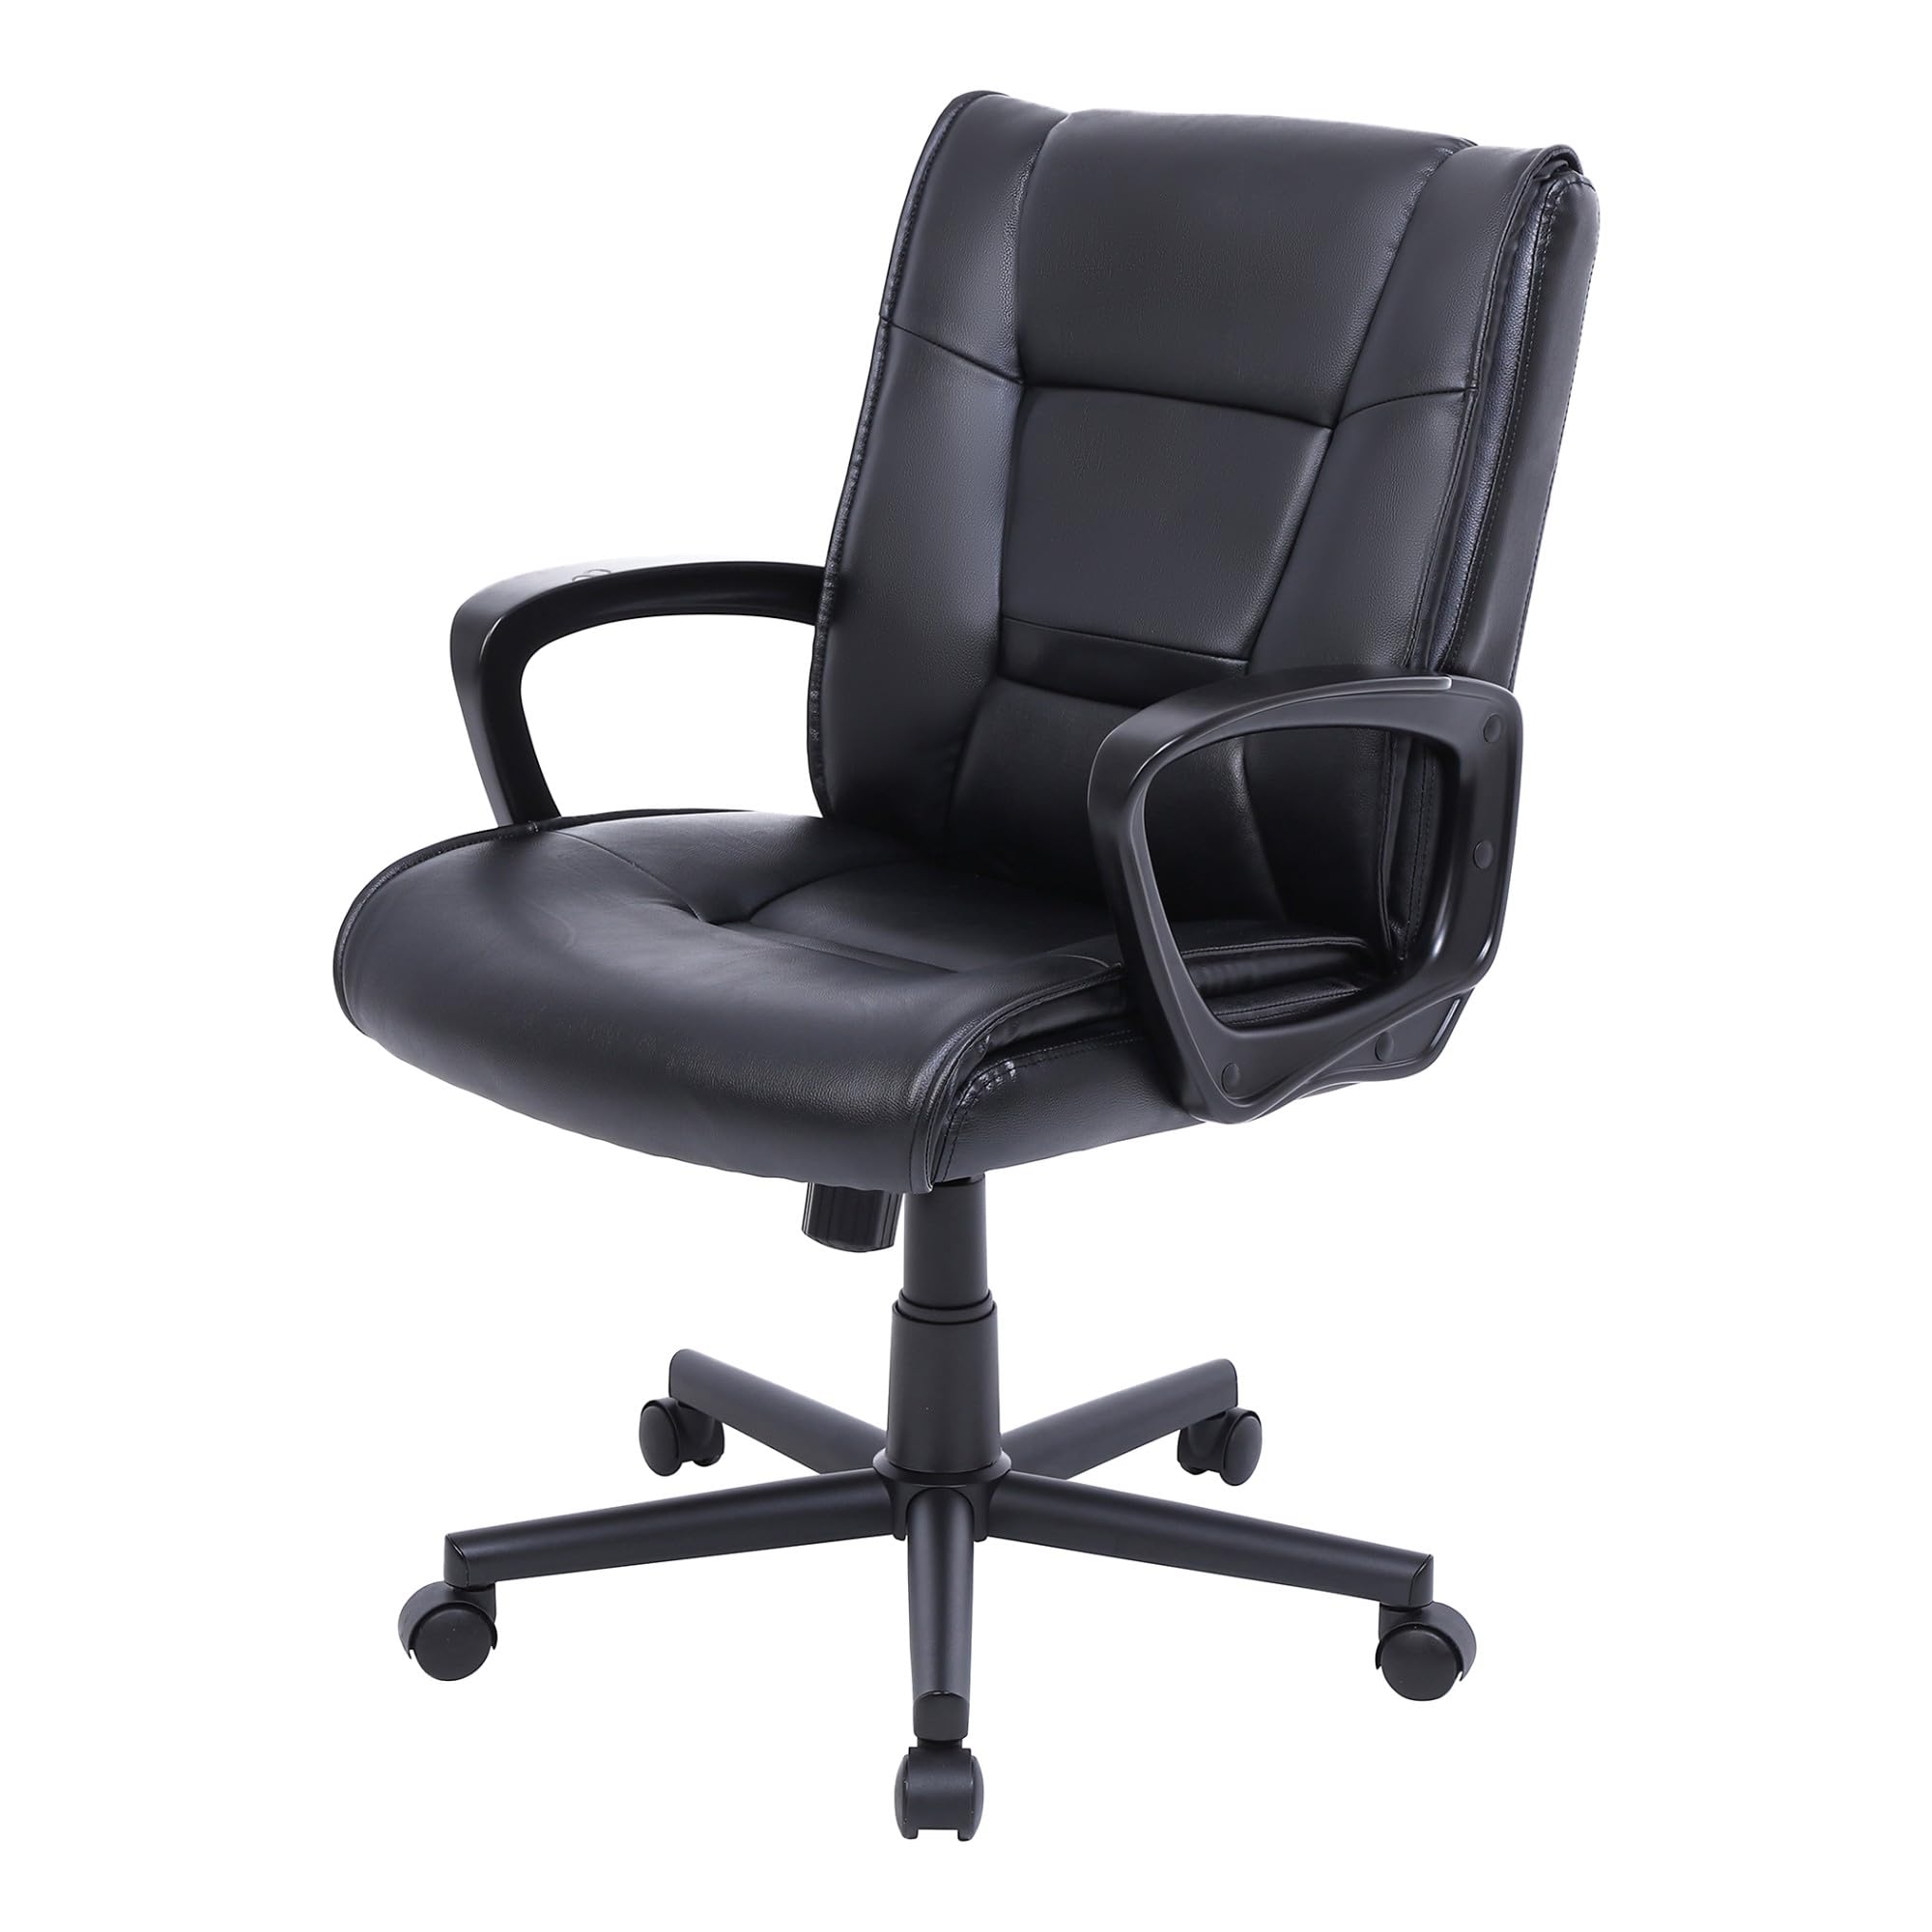 Realspace® Rezzi Vegan Leather Mid-Back Manager Chair, Black